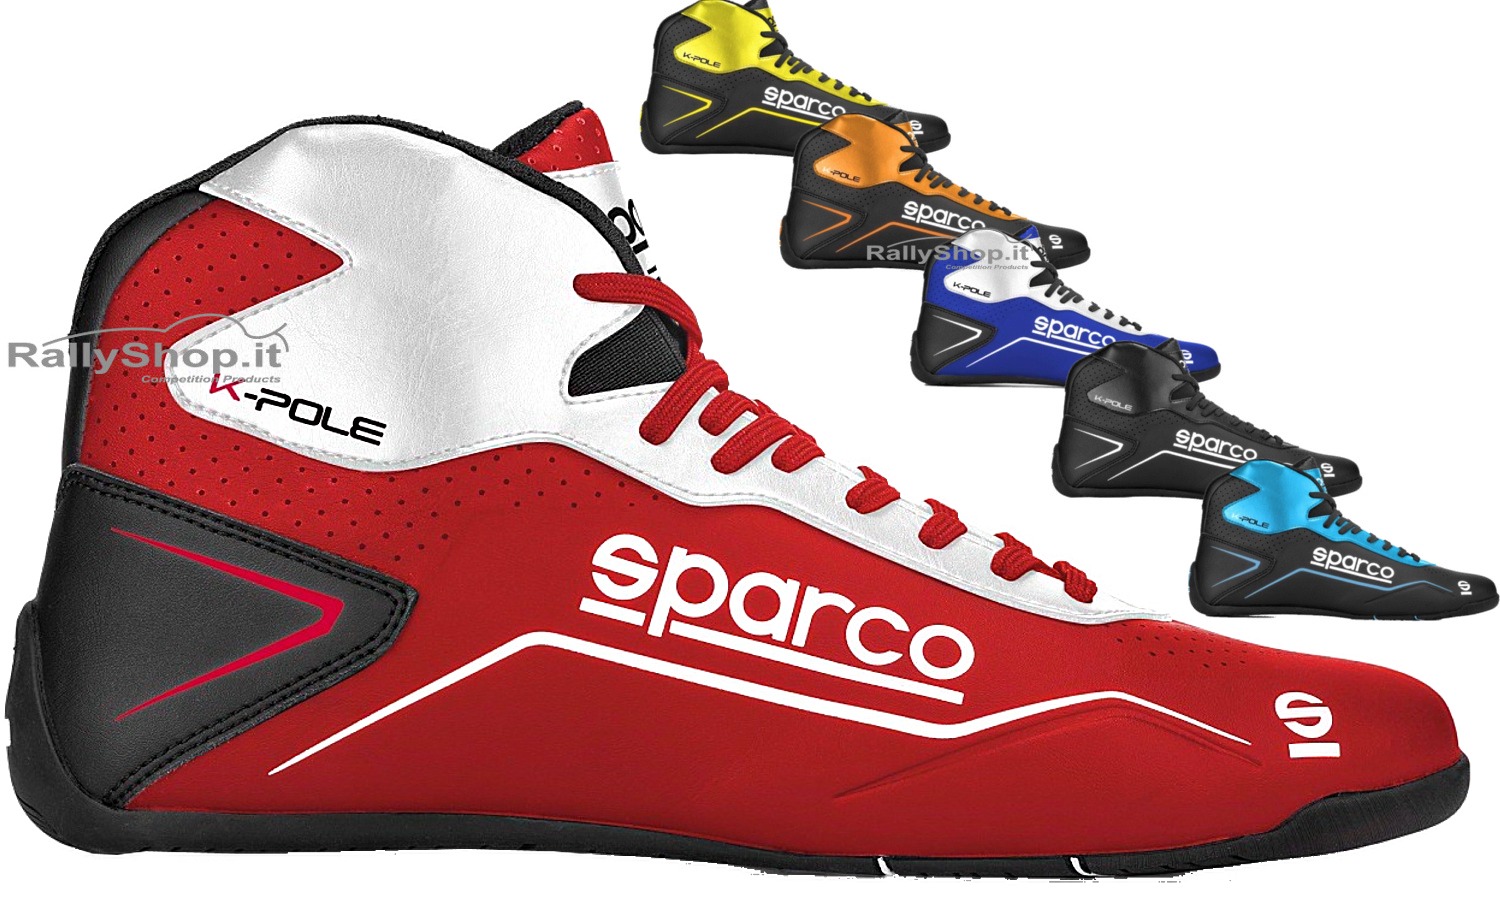 Shoes Sparco K-POLE - 001269 - RallyShop Italy